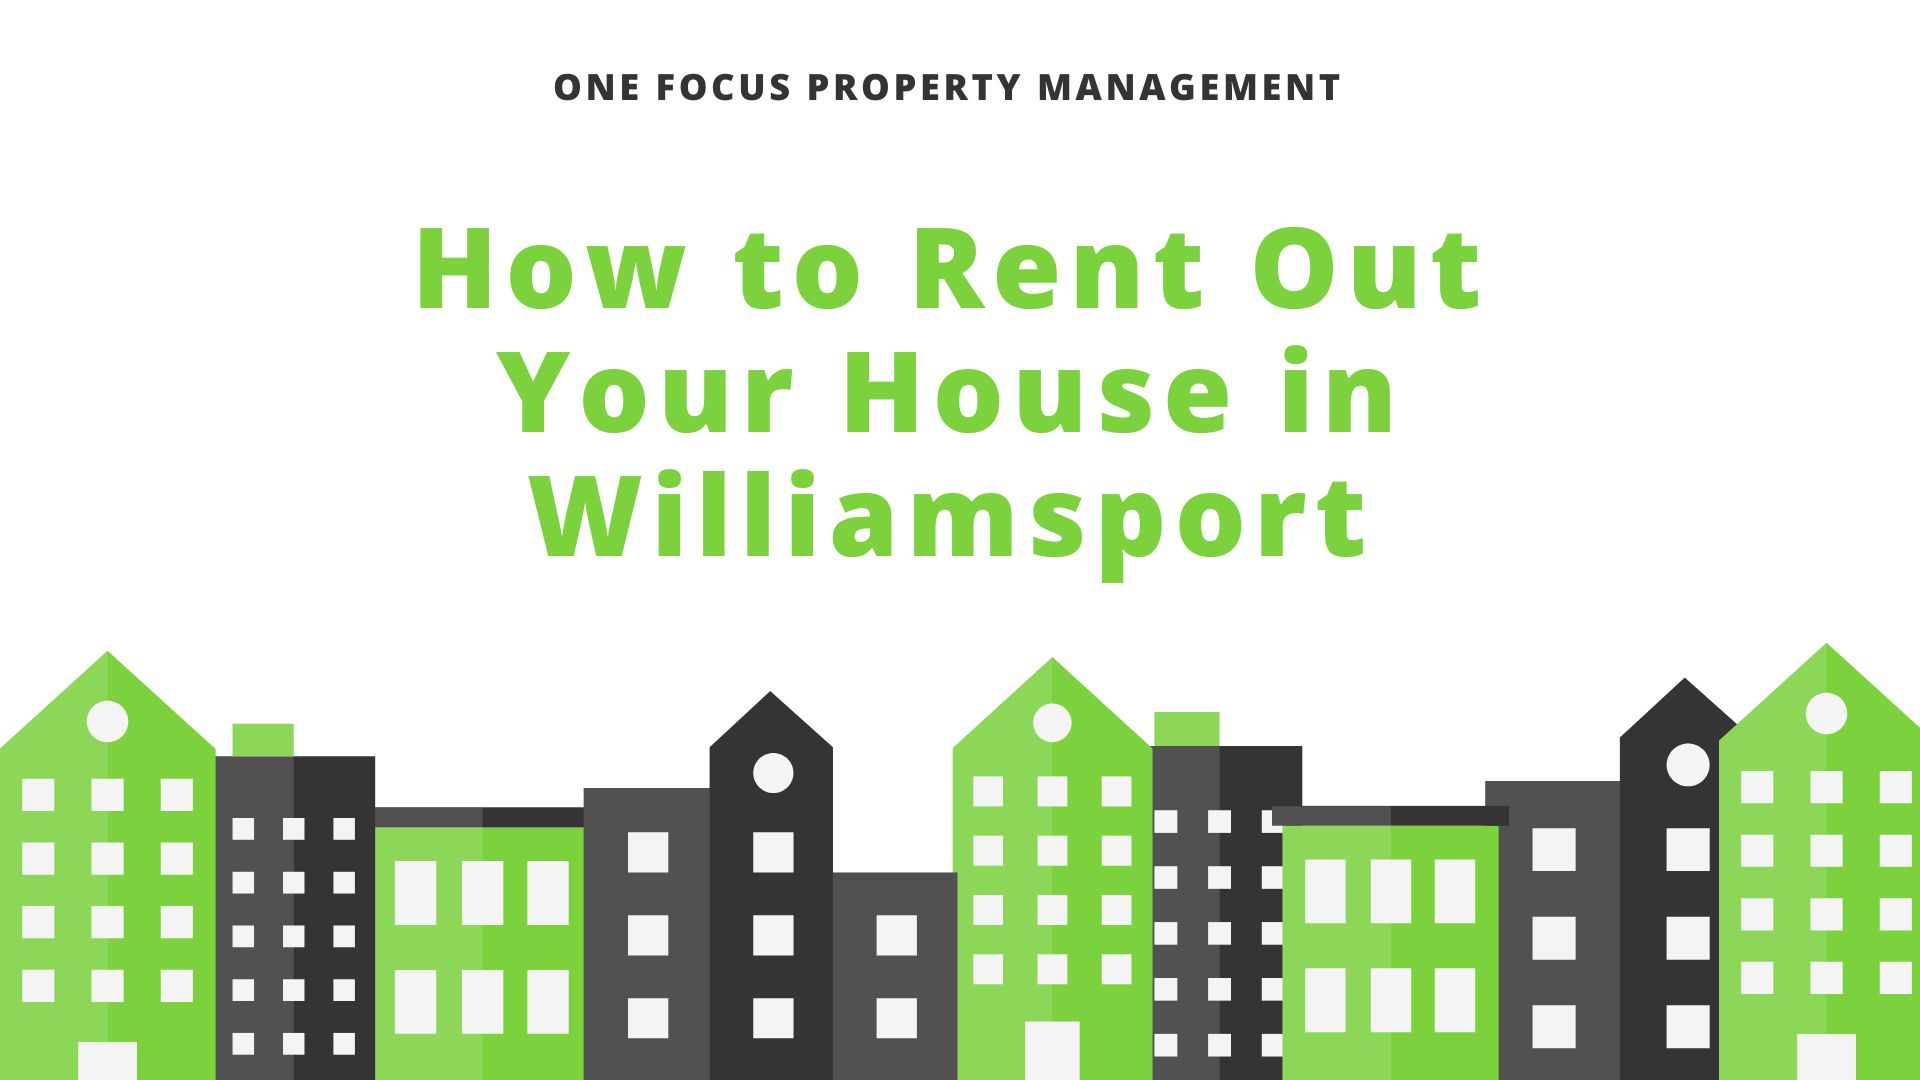 How to Rent Out Your House in Williamsport